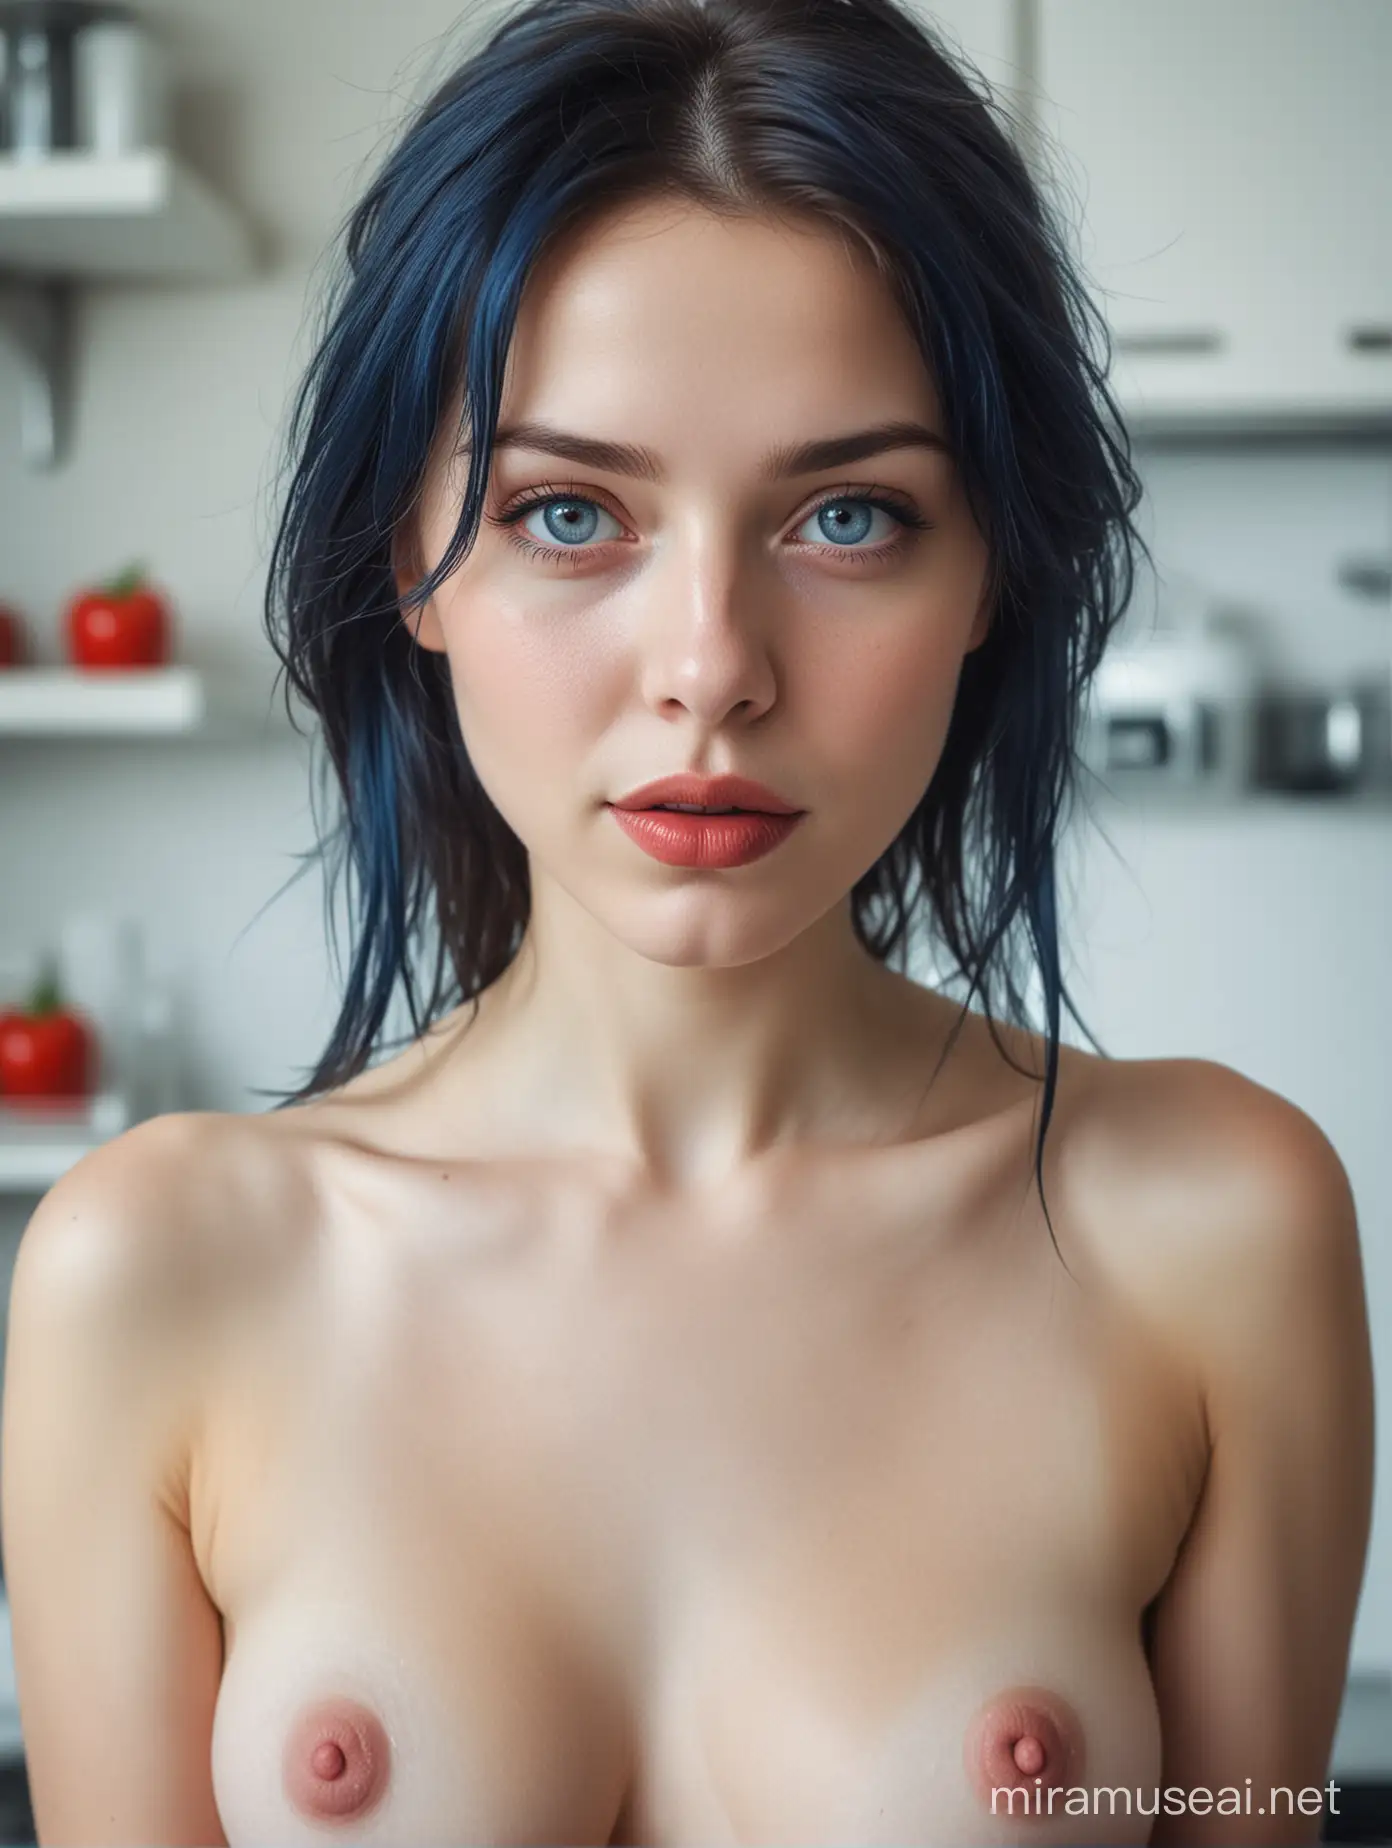 Beautiful Woman in Blue Expressive Kitchen Scene with Vibrant Colors